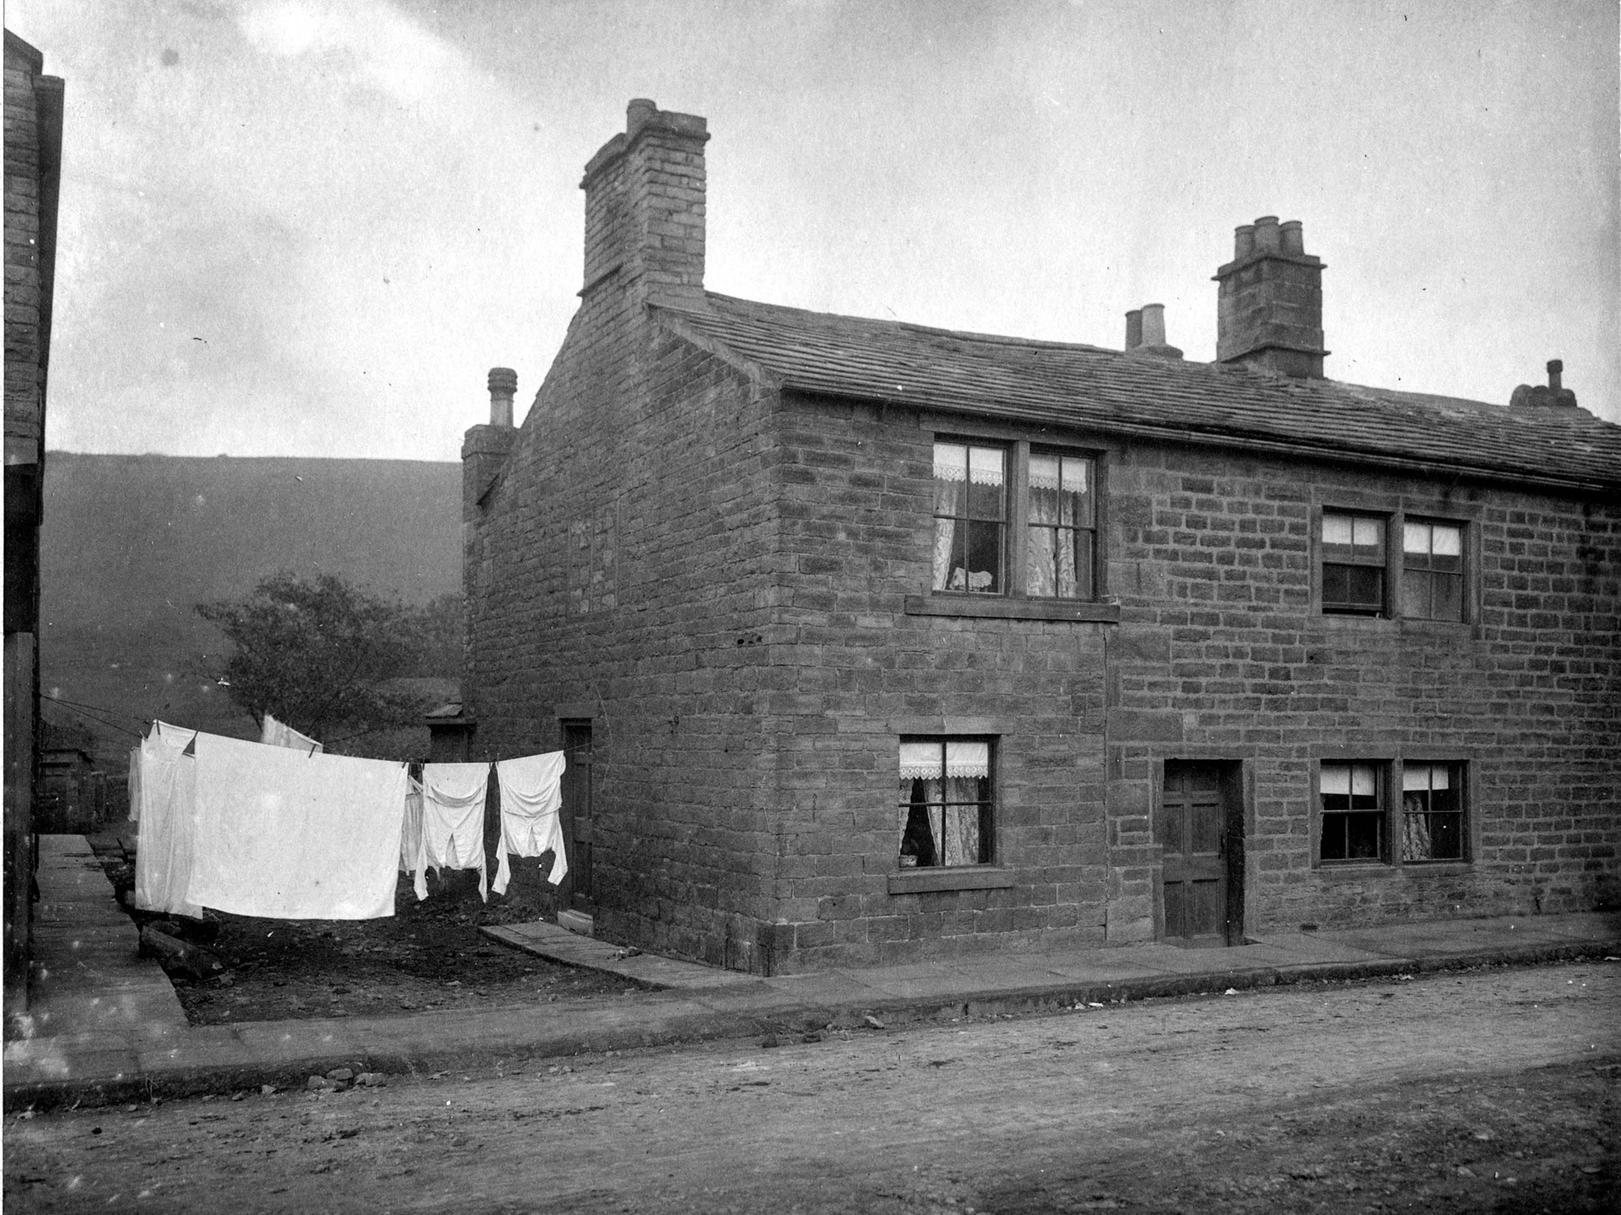 Stone built, two storey cottages on Bagley Lane. The photo was taken as part of an assessment of the area prior to the work on sewers which was about to commence.